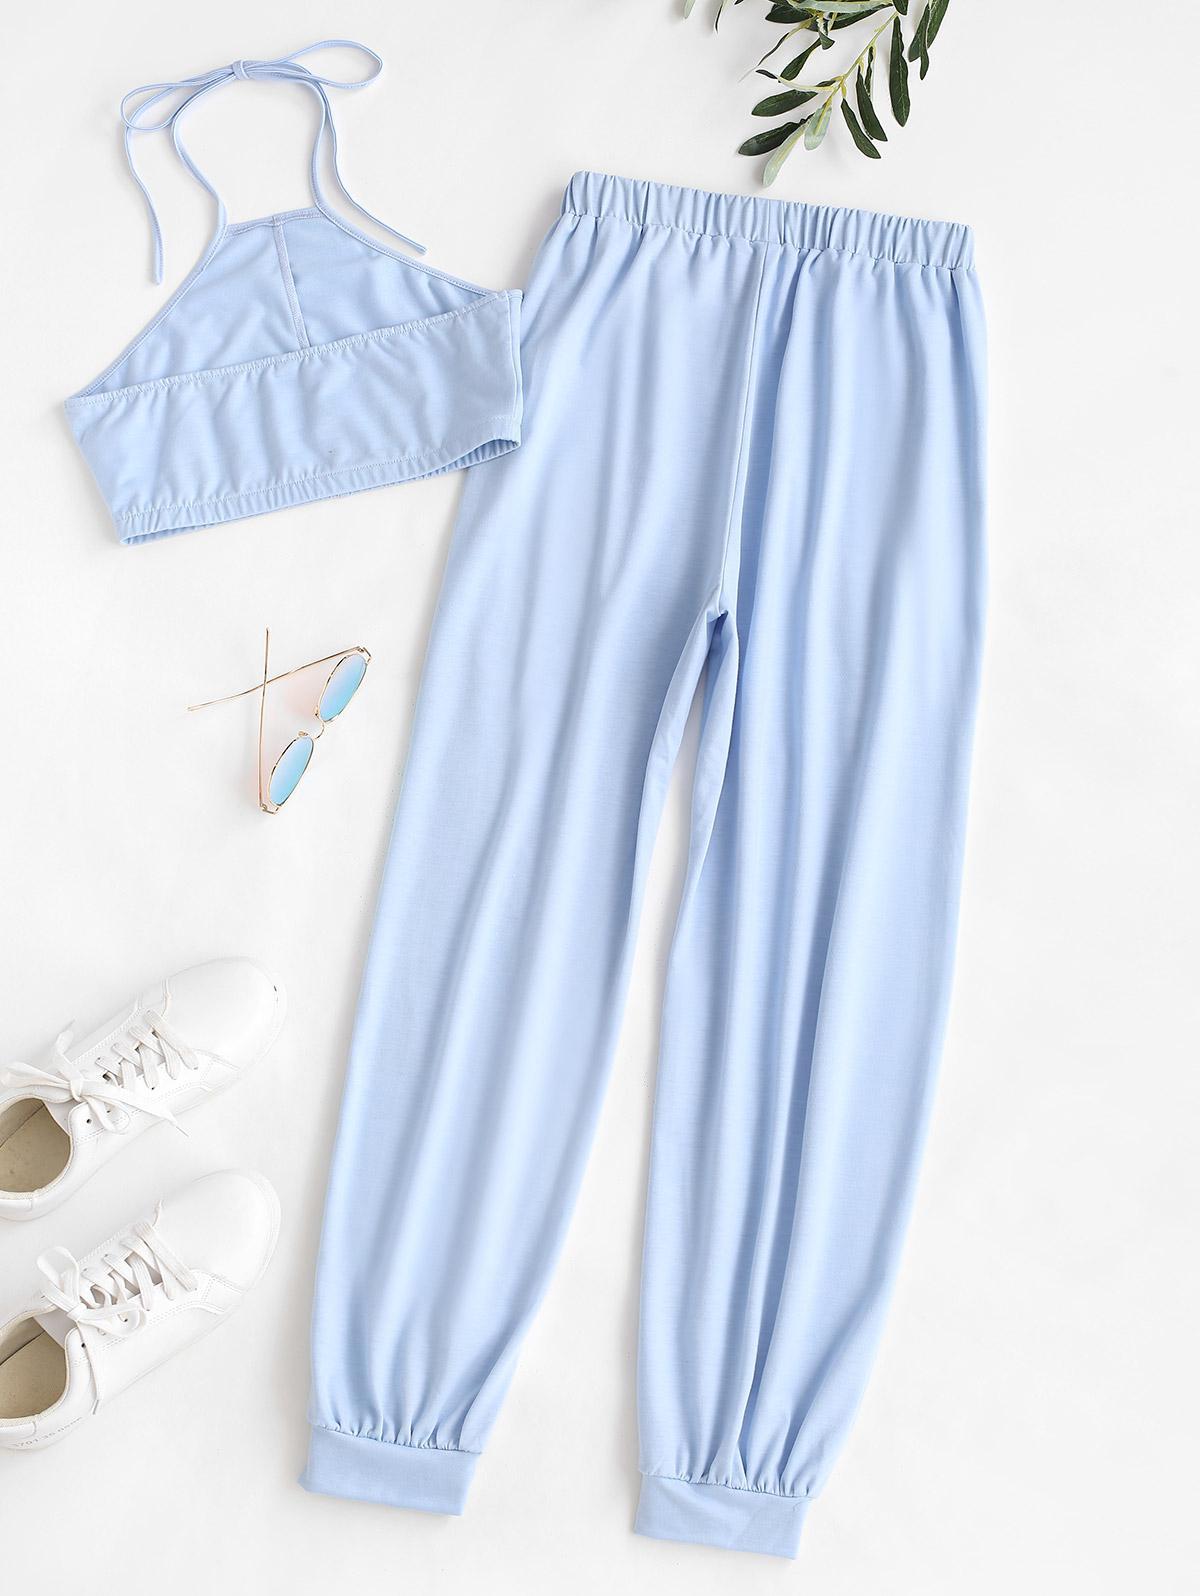 Zaful Co-ords Cropped Halter Top And jogger Pants Set in Blue | Lyst